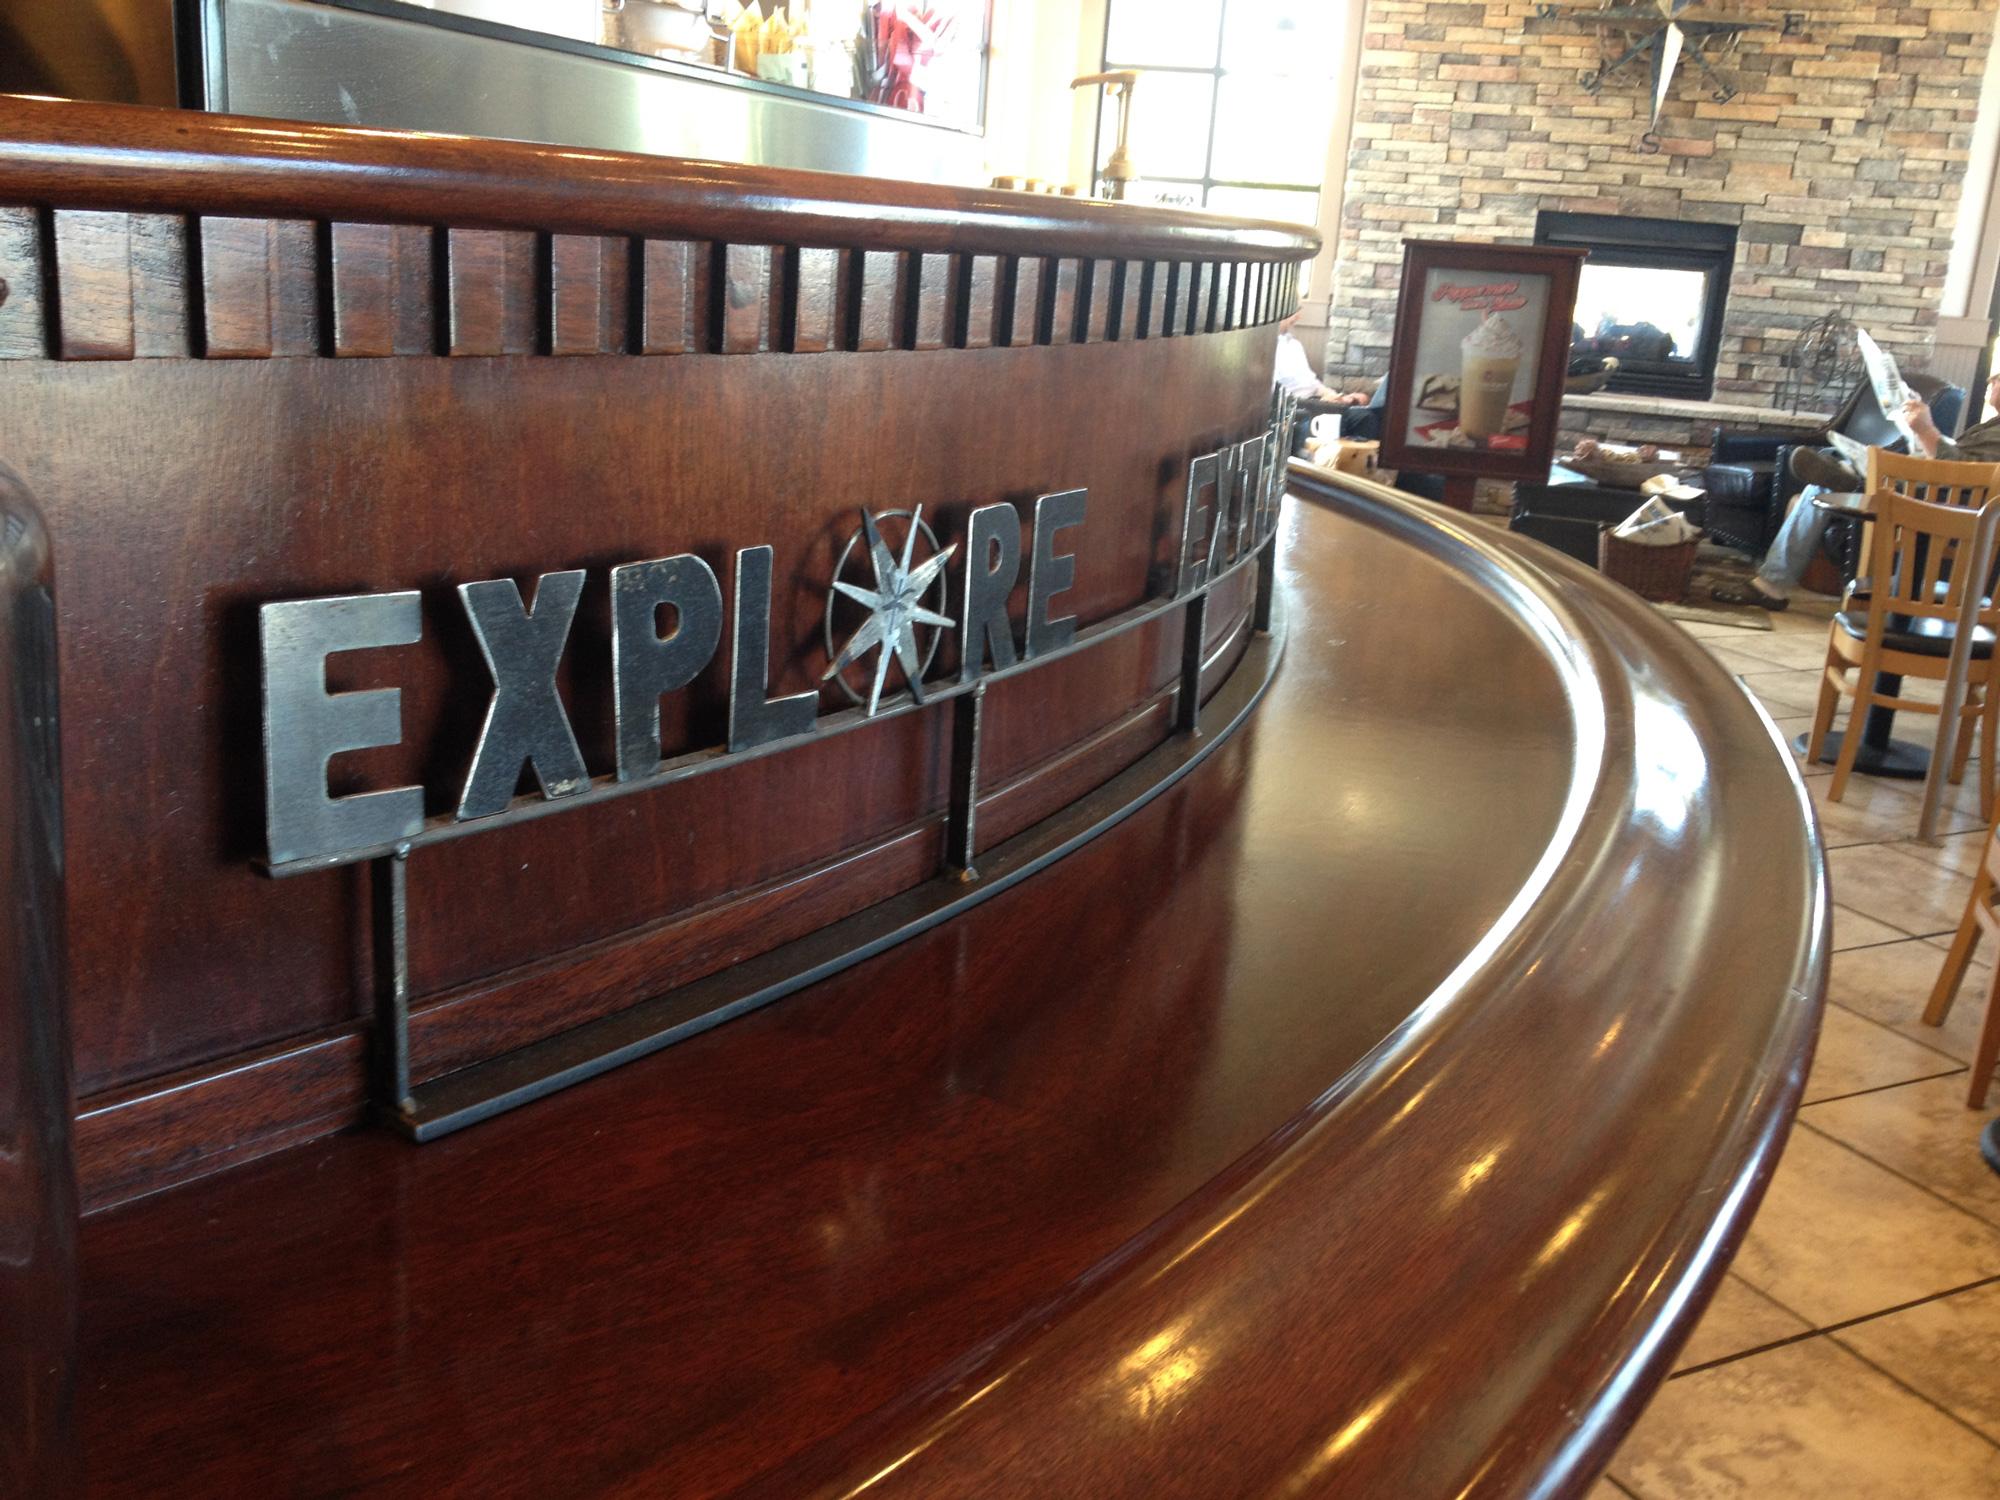 Metal Explore Extraordinary sign at flagship Lacey coffee shop